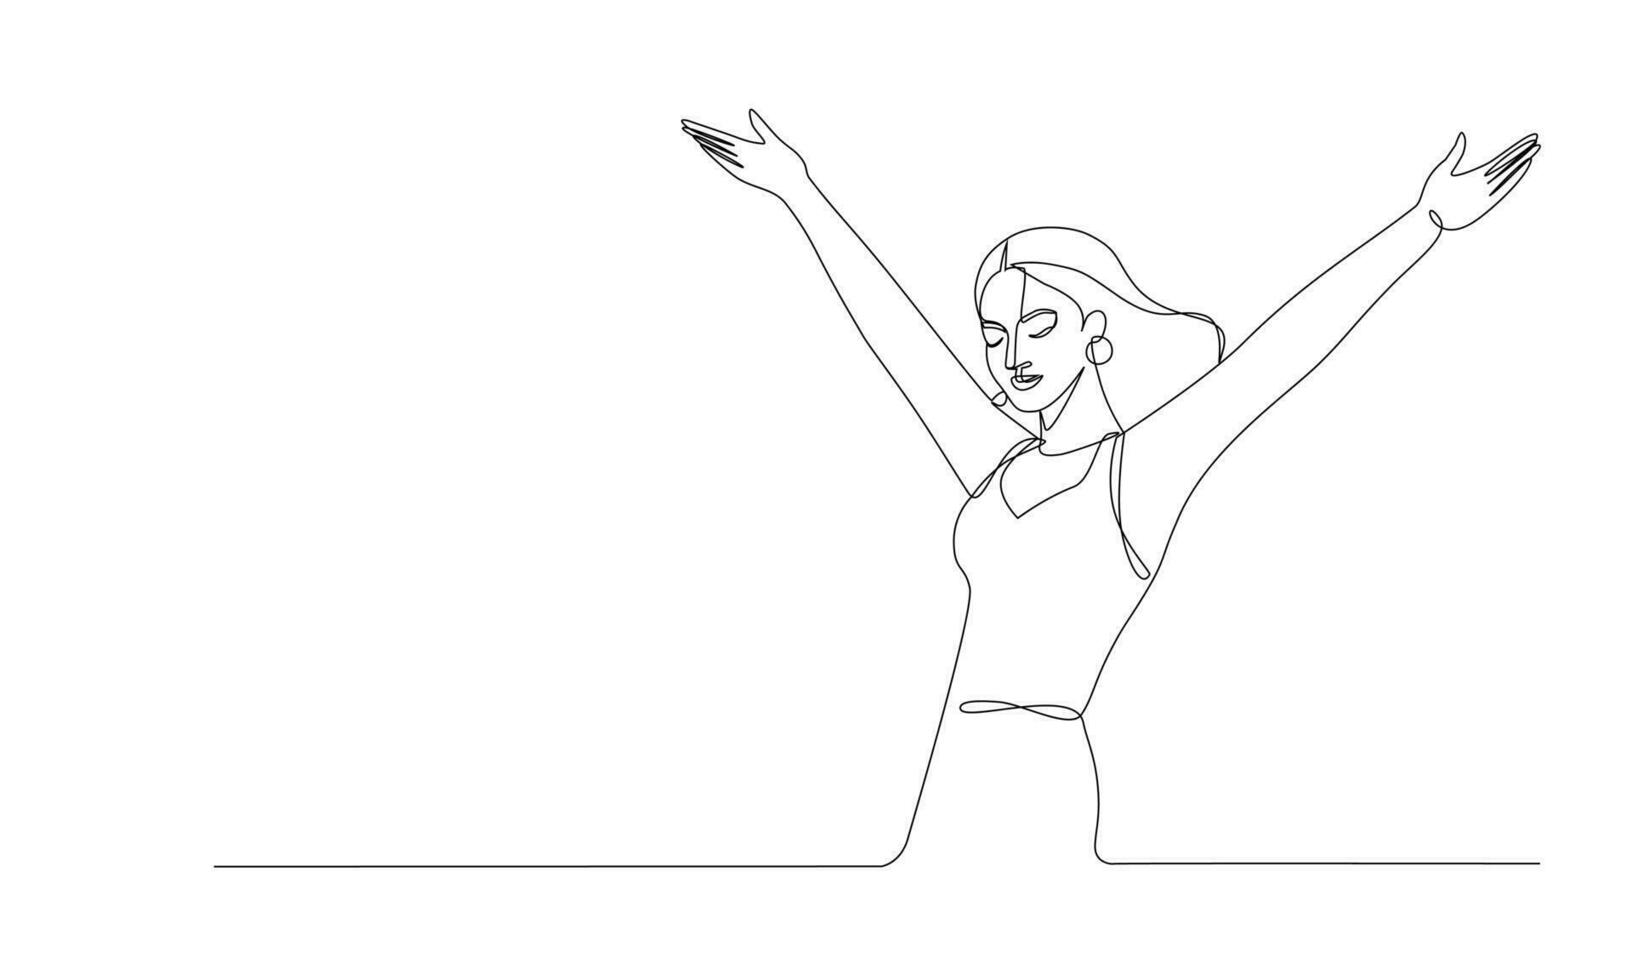 One Line Art Illustration of a Woman with Raised Hands in a Gesture of Greeting or Ending of a Performance, Dance, Joyful Expressions, Celebration of Femininity, Uplifting Energy, Medium Shot vector